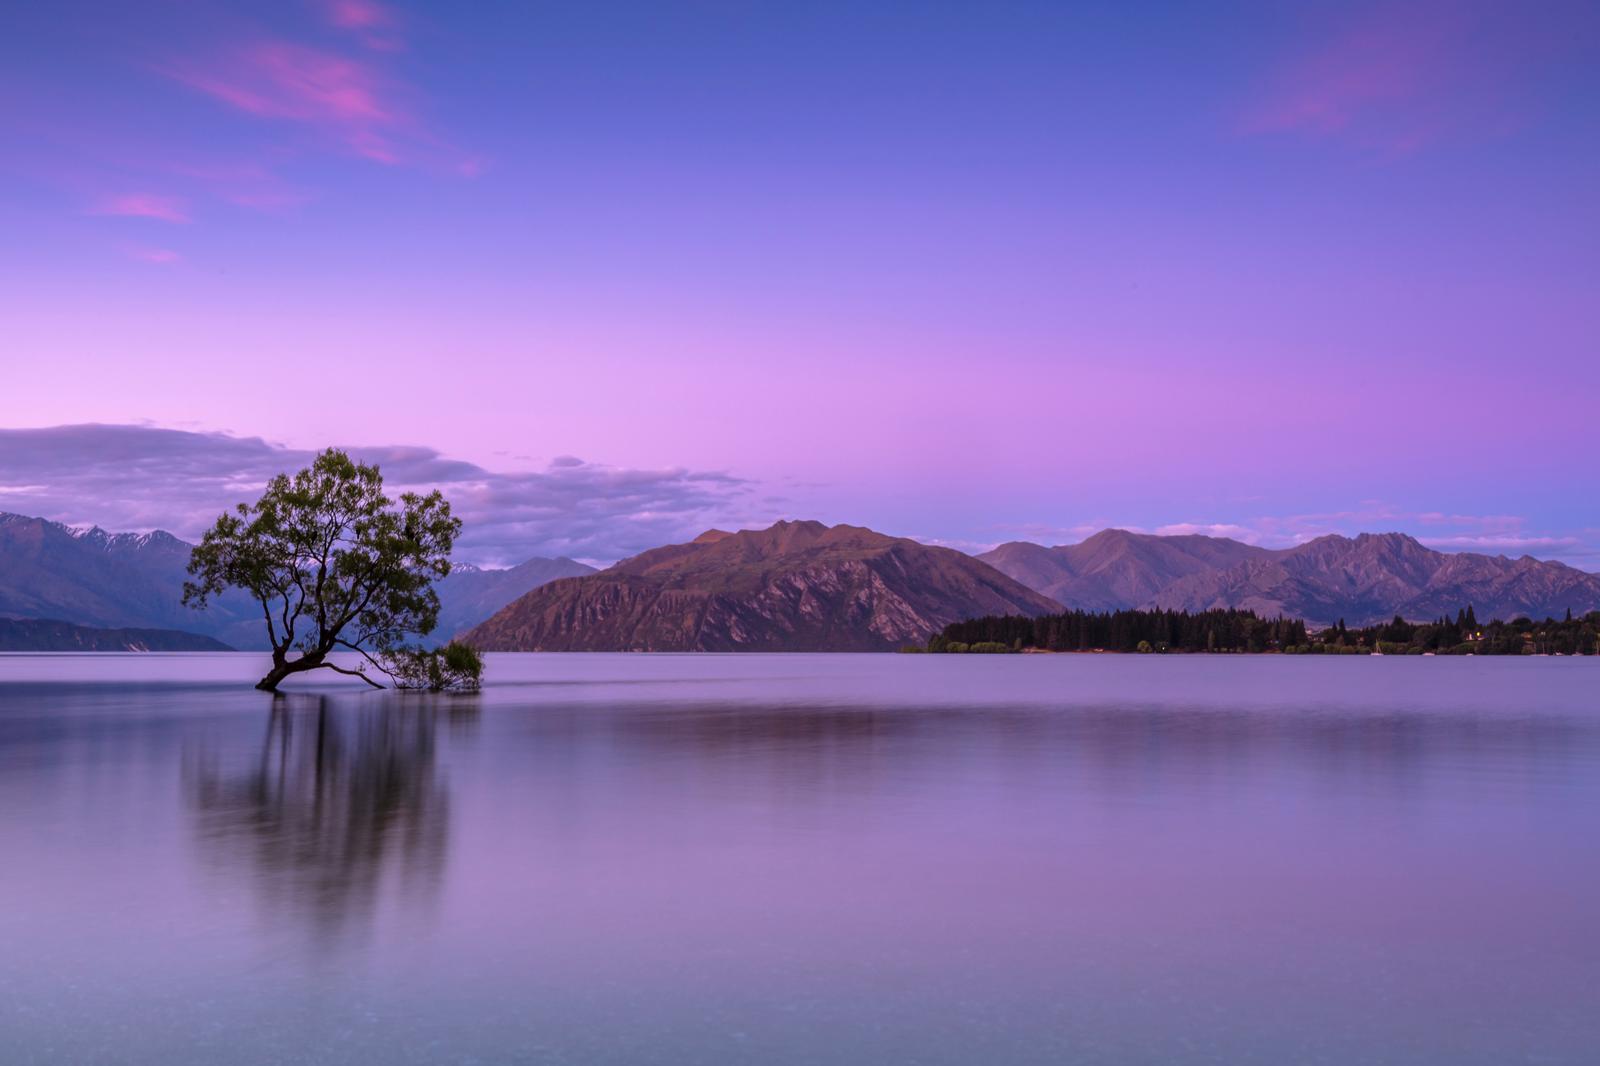 New Zealand lake at dusk with purple hue and mountains in the background.